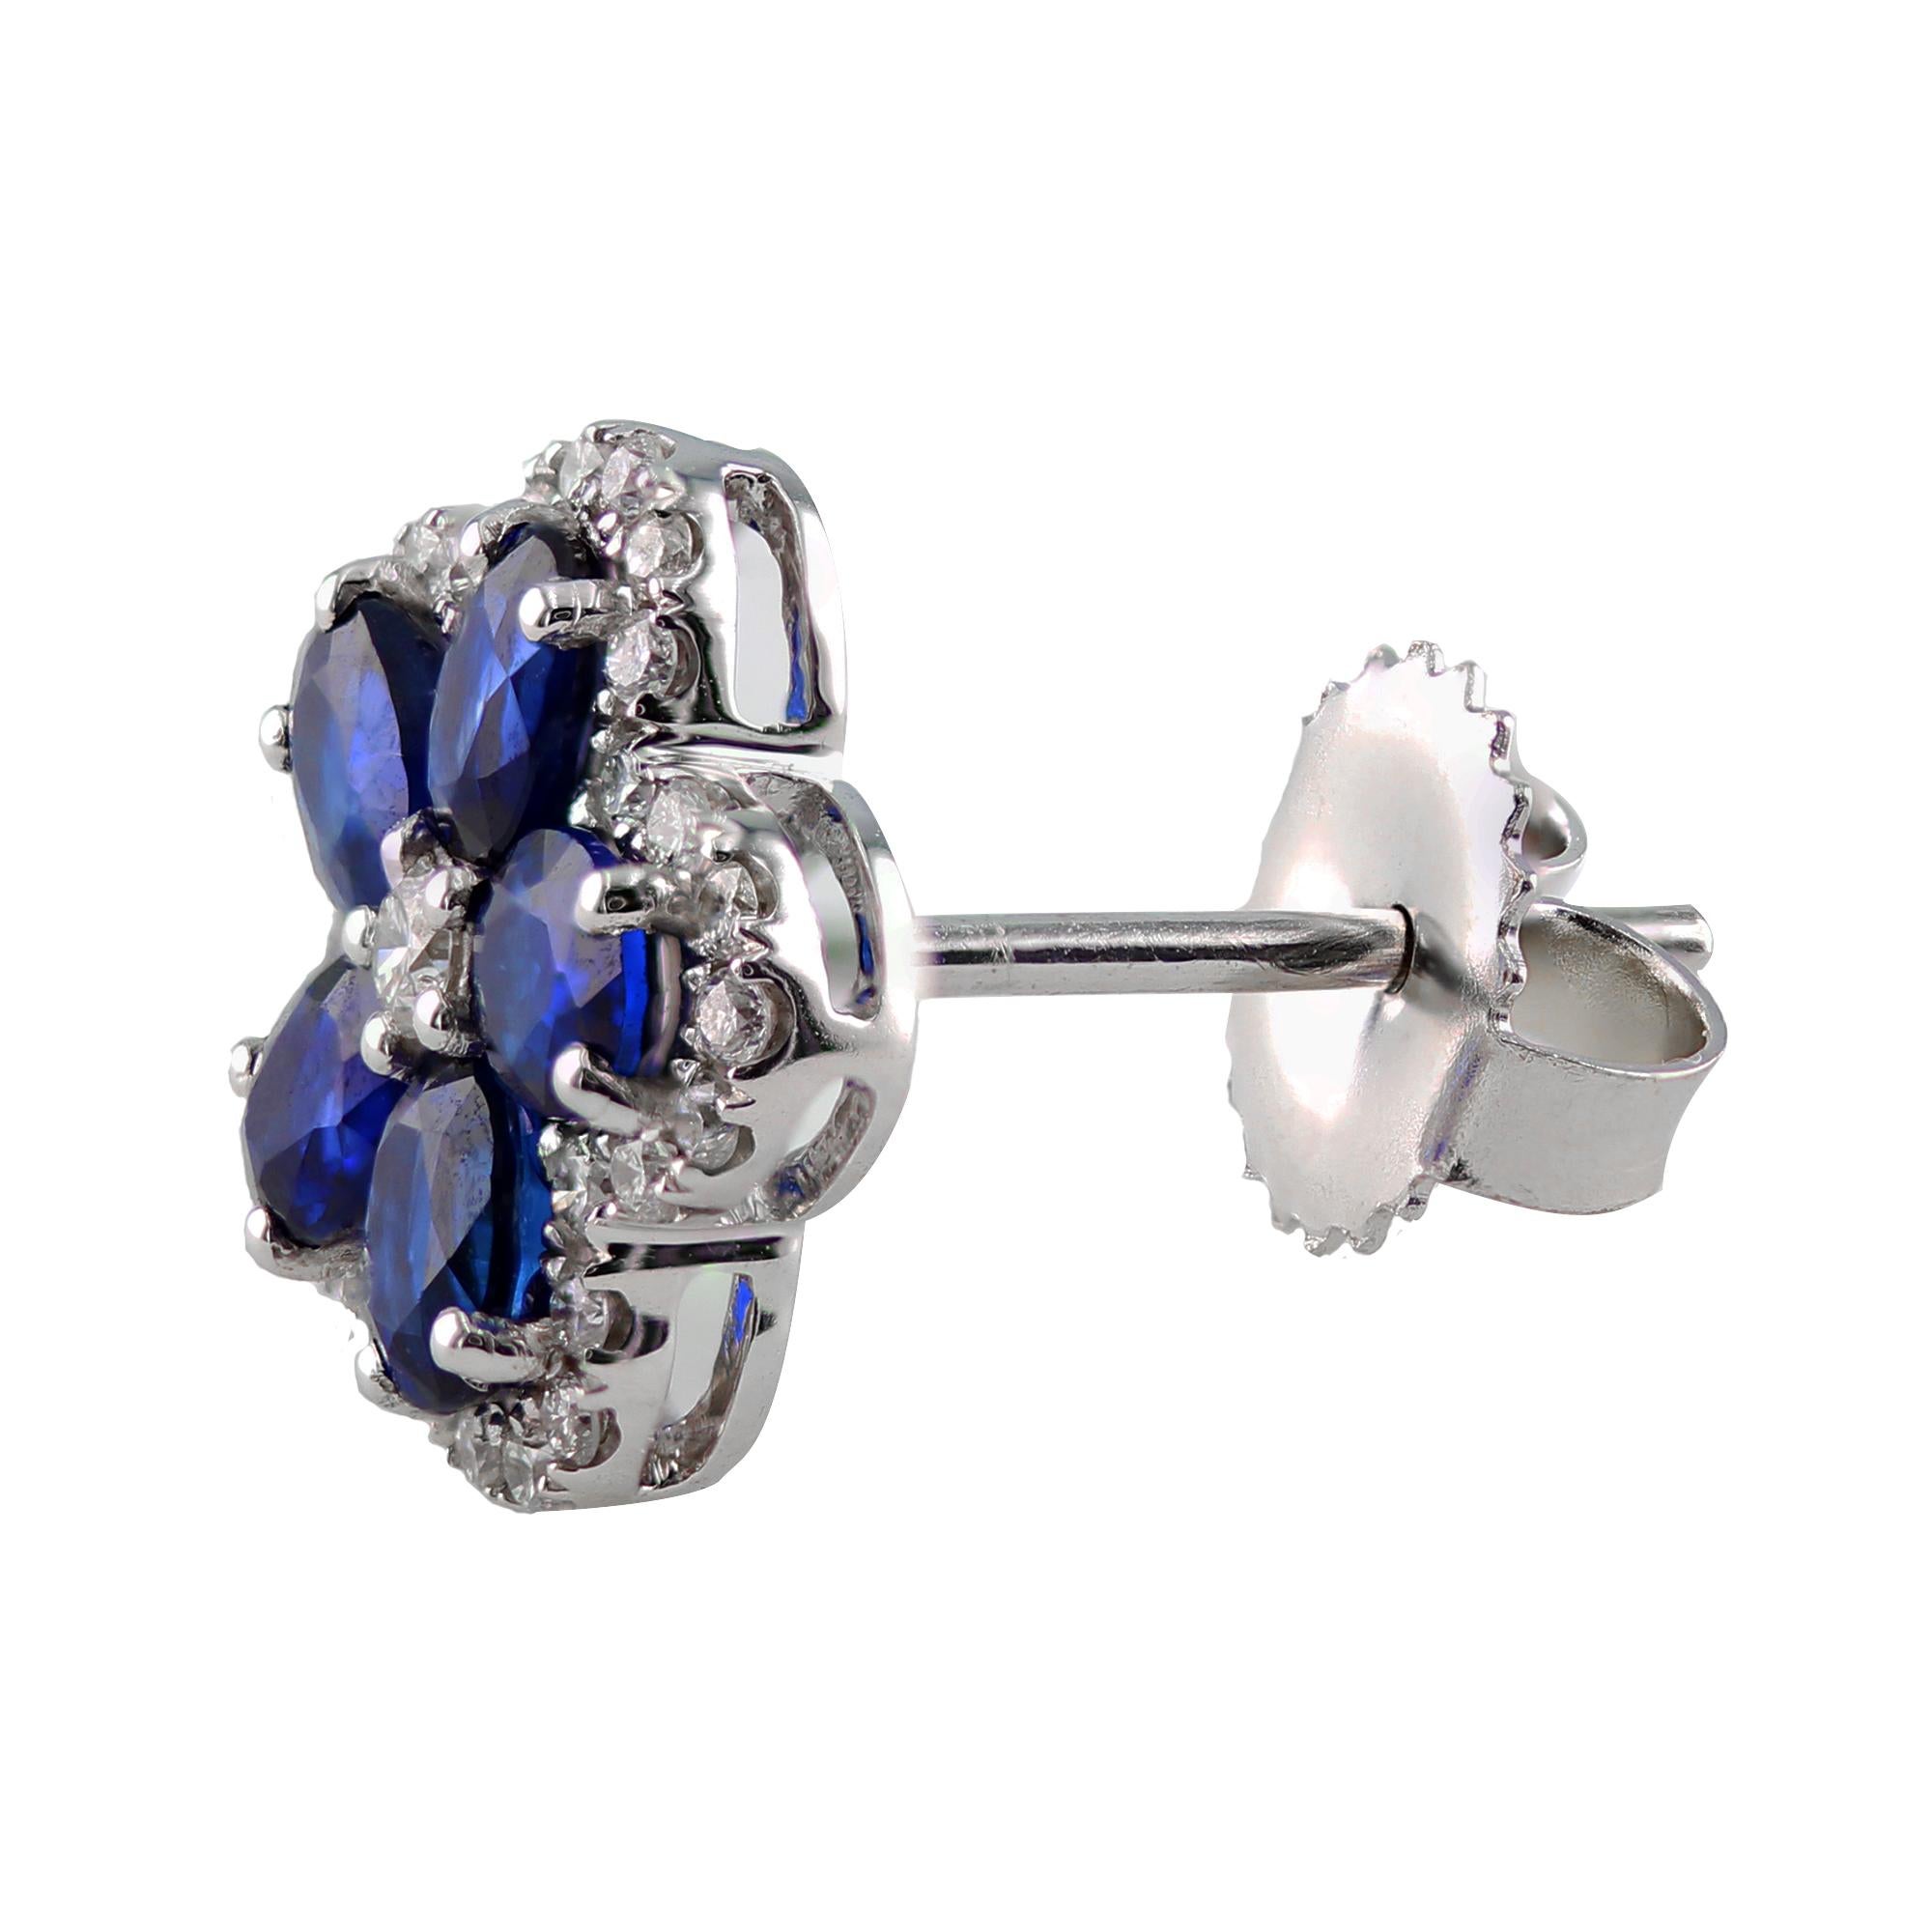 These stylish earrings features 10 oval Sapphires, 2.20 carat total weight.

Surrounded by round diamonds, with a round diamond center, 0.45 carat total weight.

Set in 18K.

A pair of beautiful and elegant Sapphire earrings, fit for any occasion.
